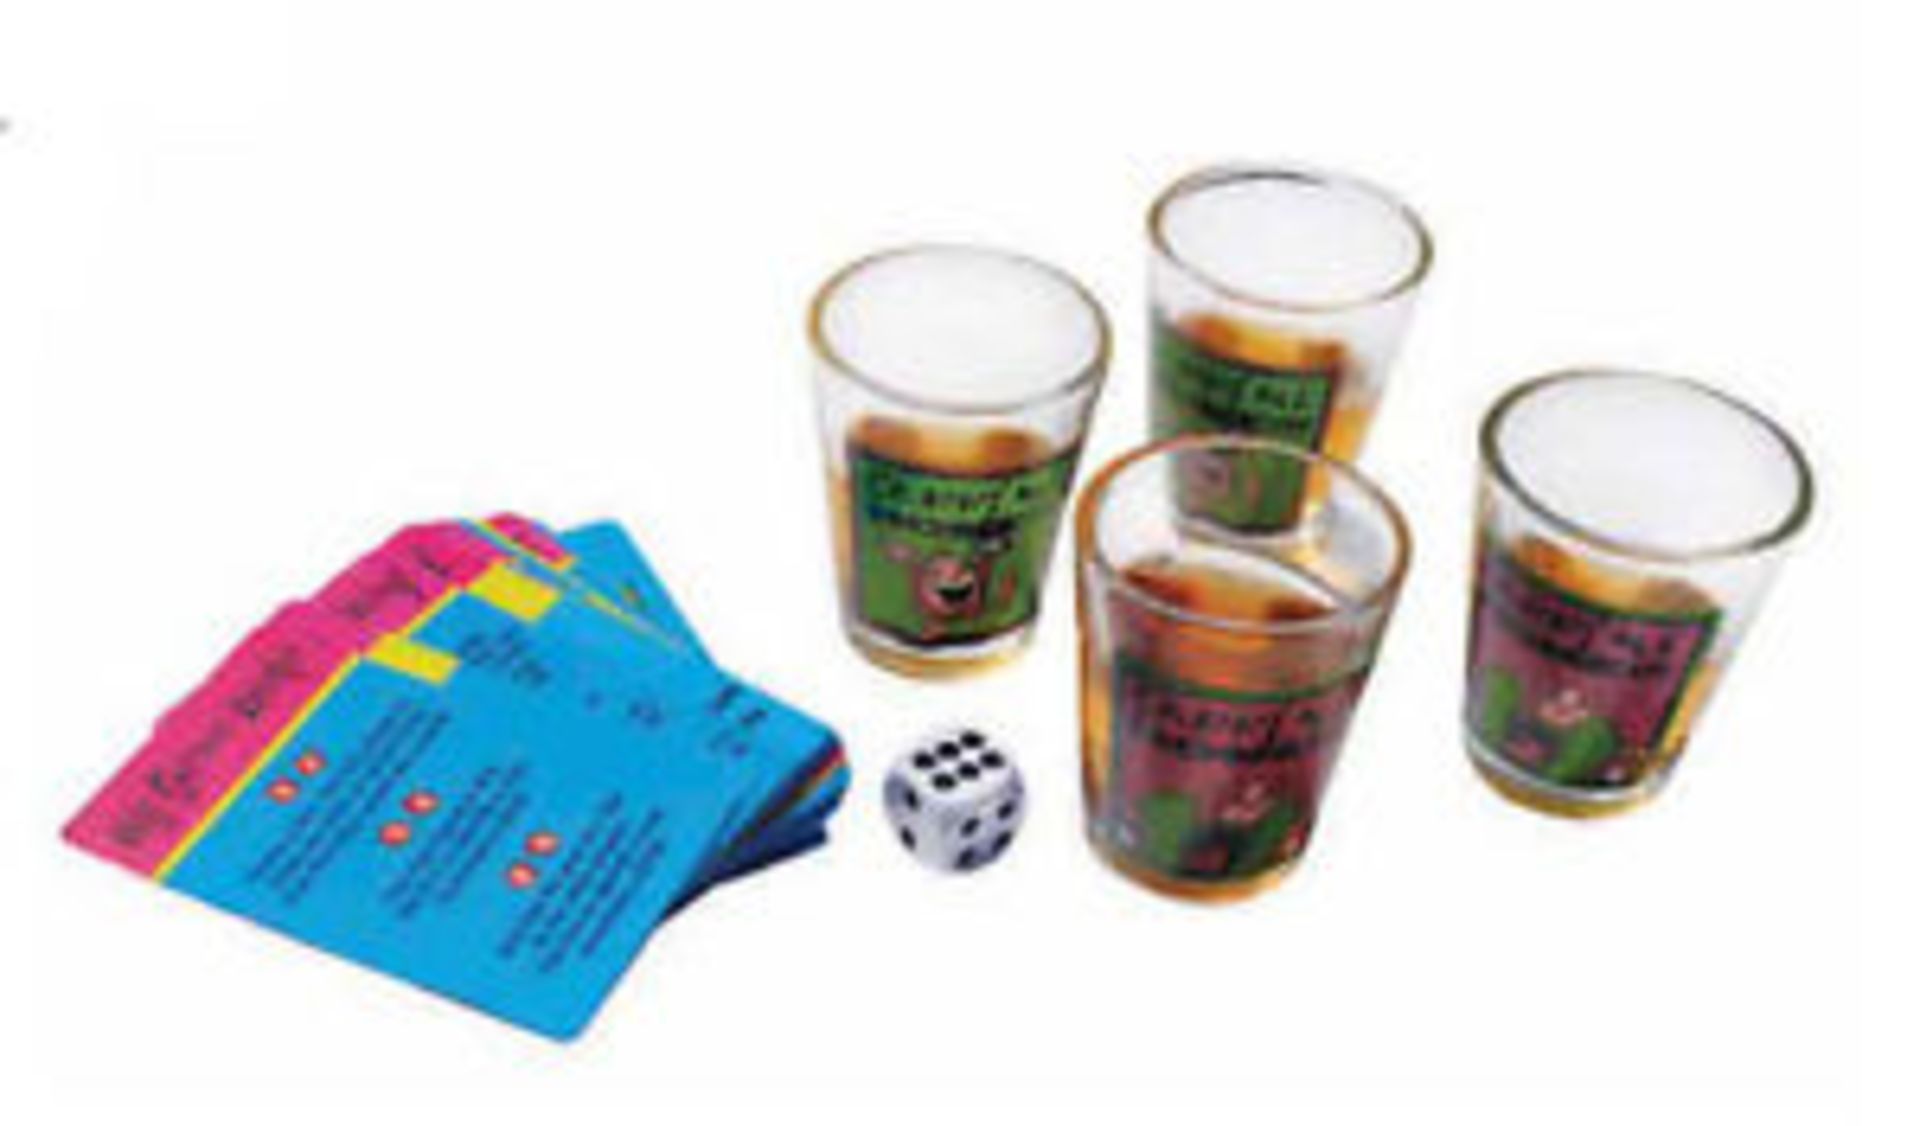 V Drinking Card Game With Shot Glasses & Dice - Image 2 of 2